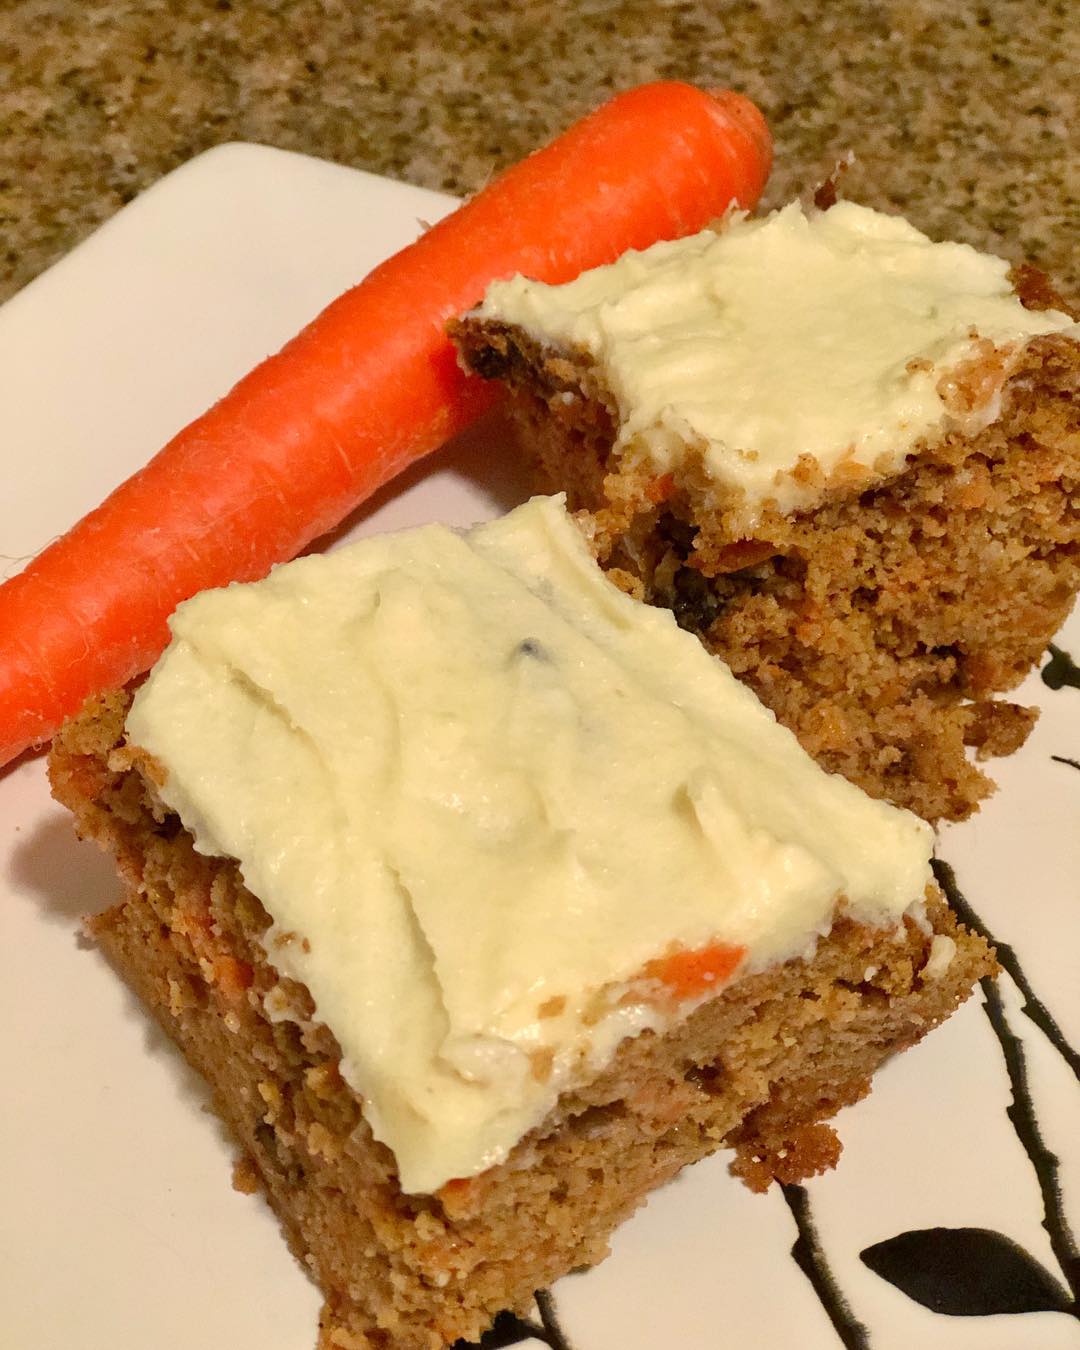 I saw carrot cake when I was at Texas De Brazil the other night and I just needed to have some so made this 275 calorie, 26.5g fat, 5.5g net carbs, 9g protein per piece carrot cake (18 pieces in this recipe). I used my fitness pal to get those so the actual amounts may differ… I ate way more than one piece yesterday and my glucose levels today were 79 mg/dL and ketones .6… My gluten free friends LOVED it… so thrilled about this recipe; Try it out and let me know what you think!
——
For the Cake:
2 cups almond flour
3/4 cup coconut flour
4 tsp baking powder- gluten free
1 tsp baking soda
3 tsp ground cinnamon
1 tsp ground nutmeg
1/2 tsp ground cloves
1/4 tsp salt
6 large eggs
1 1/4 cups swerve
1 stick unsalted butter, melted
1 1/4 heavy cream
1/4 cup water
1 pound carrots unpeeled, grated
Optional: 1 cup crushed walnuts (increases all macros by a LOT)
——
For the Cream Cheese Frosting:
8 ounces cream cheese, softened but still cool
5 tablespoons unsalted butter, softened but still cool
1 teaspoon vanilla extract
3/4 cup swerve
——
Cake:
Preheat oven to 350 degrees
Grease a 9″ x 13″ rectangular baking pan with butter.
Combine almond flour, coconut flour, baking powder, baking soda, cinnamon, nutmeg, cloves, allspice, and salt in a medium bowl.
In a large bowl, beat eggs until well beaten. Add swerve, butter, and milk. Add flour mixture and mix thoroughly. Fold in Carrots with a rubber spatula or wooden spoon, until the mixture is fully combined.
Transfer batter to prepared pan and bake until center of cake is firm to the touch, about 40-45 minutes.
Let cake cool completely before frosting, otherwise frosting will melt
——
frosting: 
Using a hand-held mixer, beat cream cheese, butter, vanilla, and swerve on low speed until mixed. Increase speed to medium and beat until slightly fluffy, about 2-3 minutes